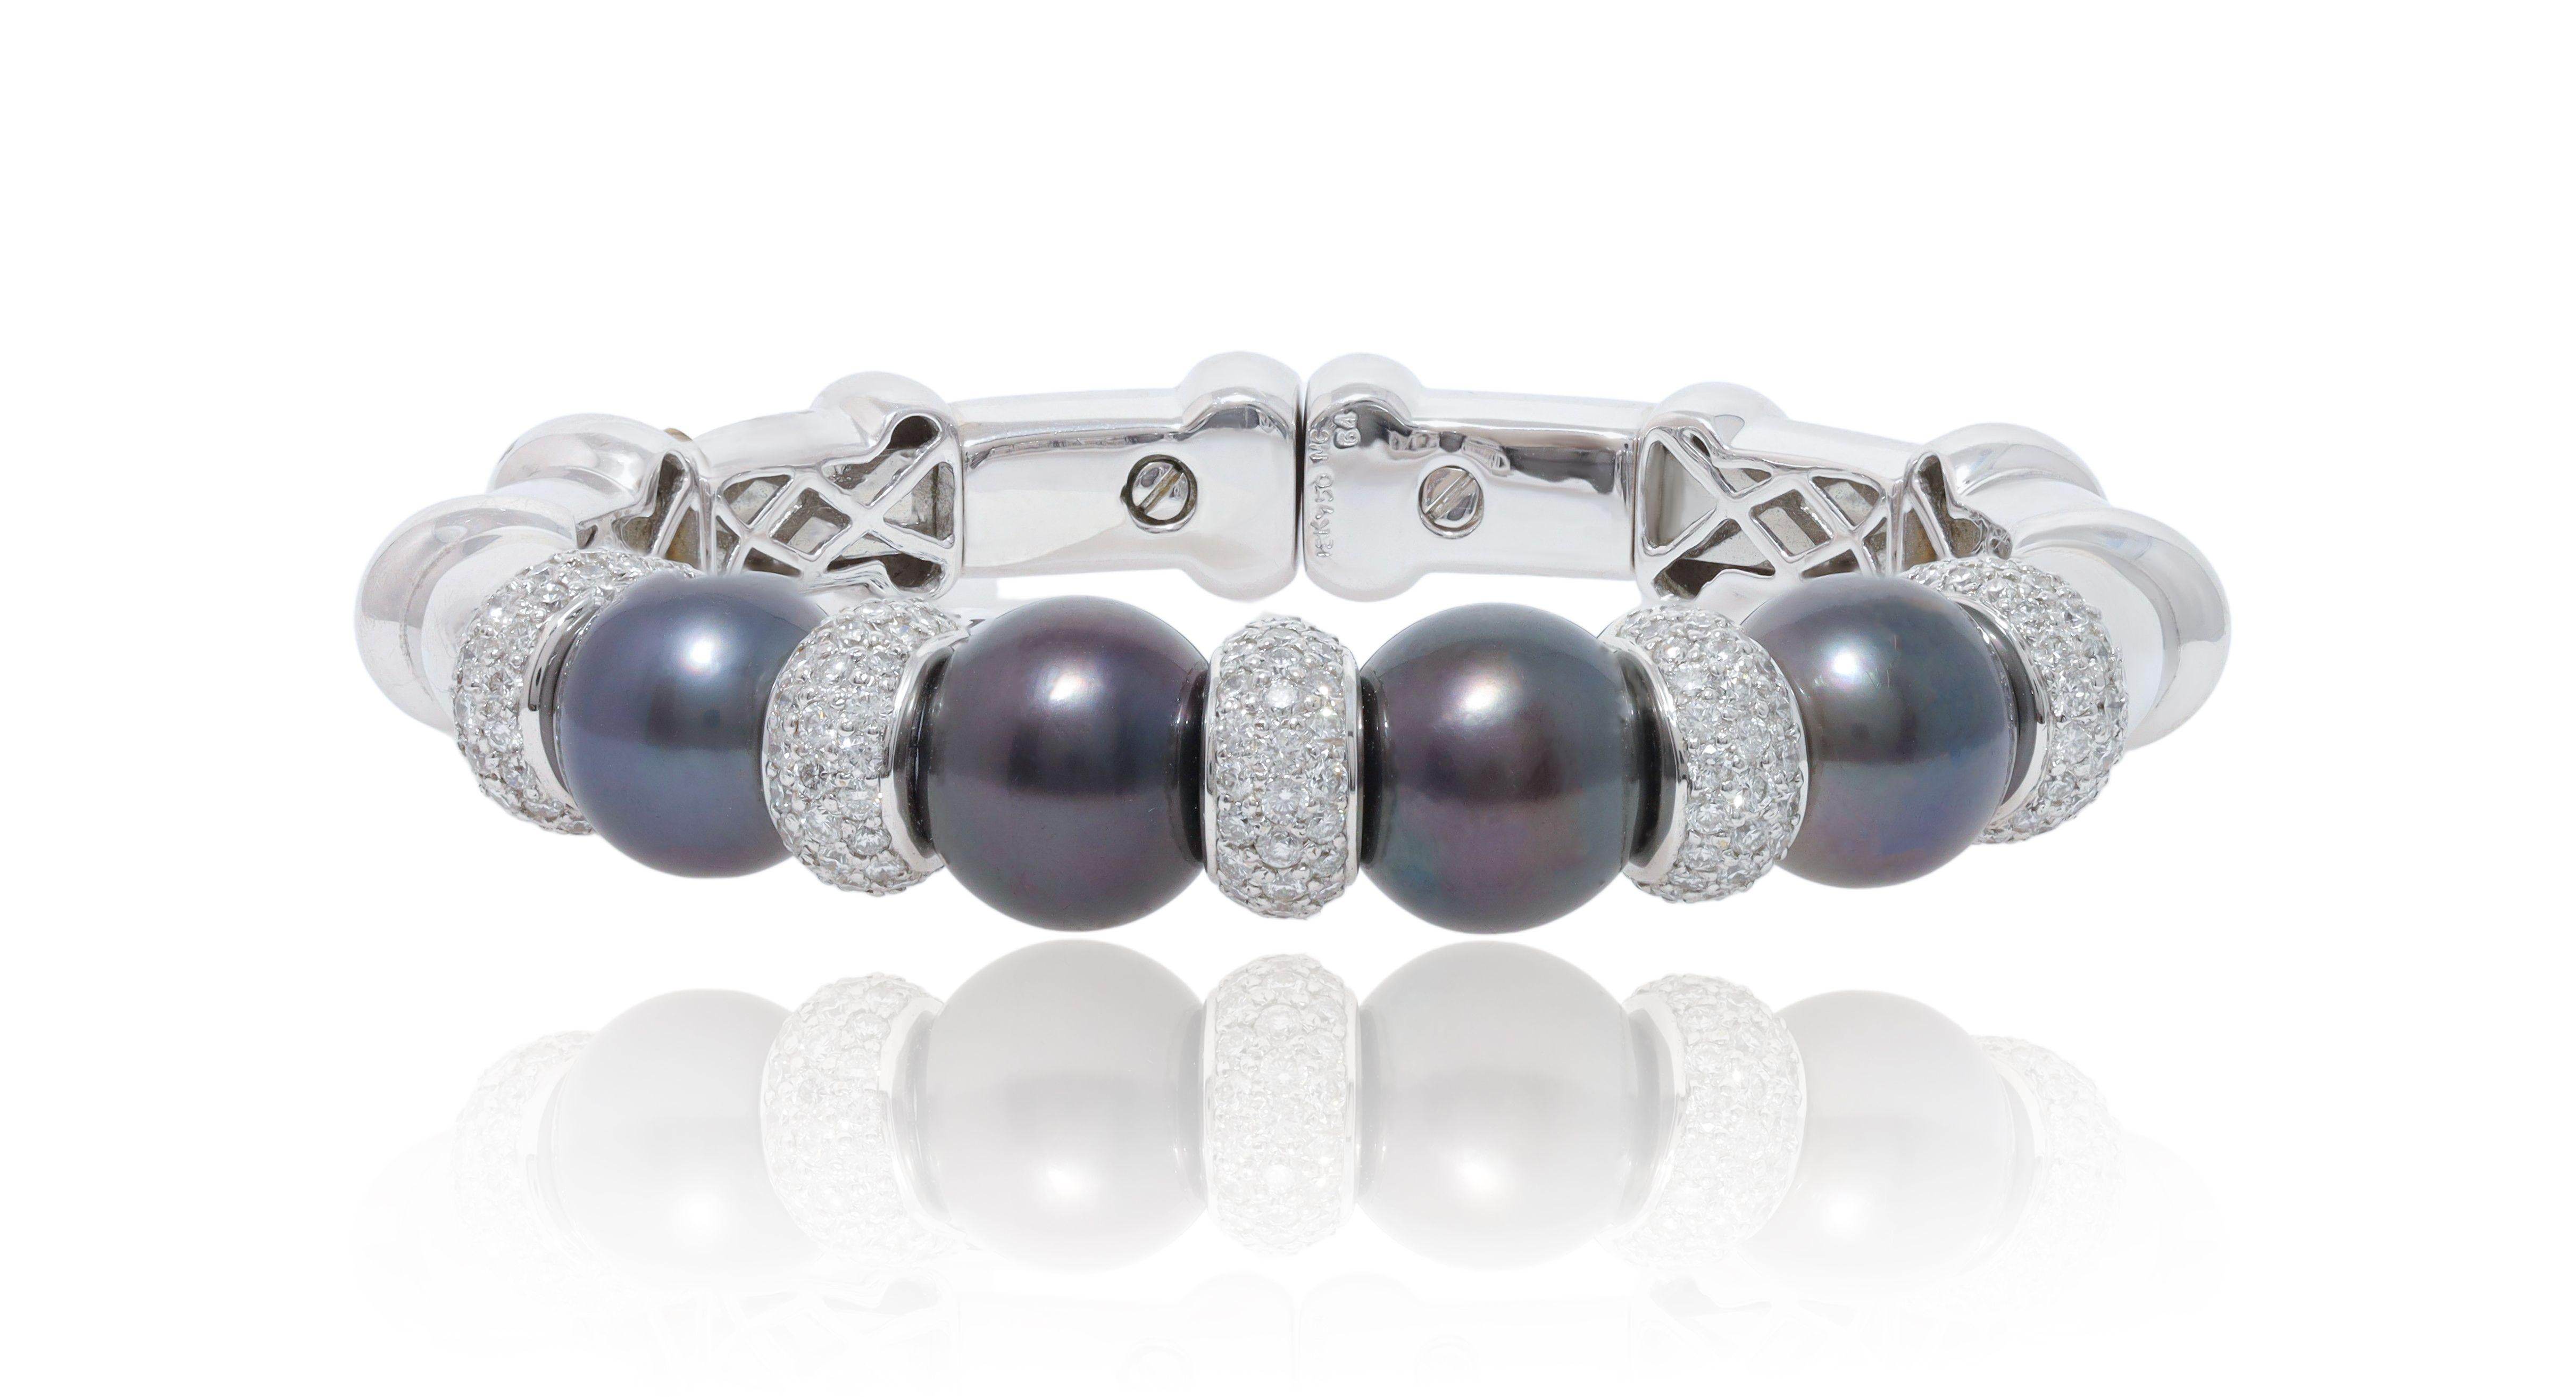 South Sea Pearl and Diamond Cuff Bangle with diamonds. 

18K white gold bracelet with rows of pavé diamonds, 4 south sea pearls with 3.00 Carats of diamonds. 

Length: 7